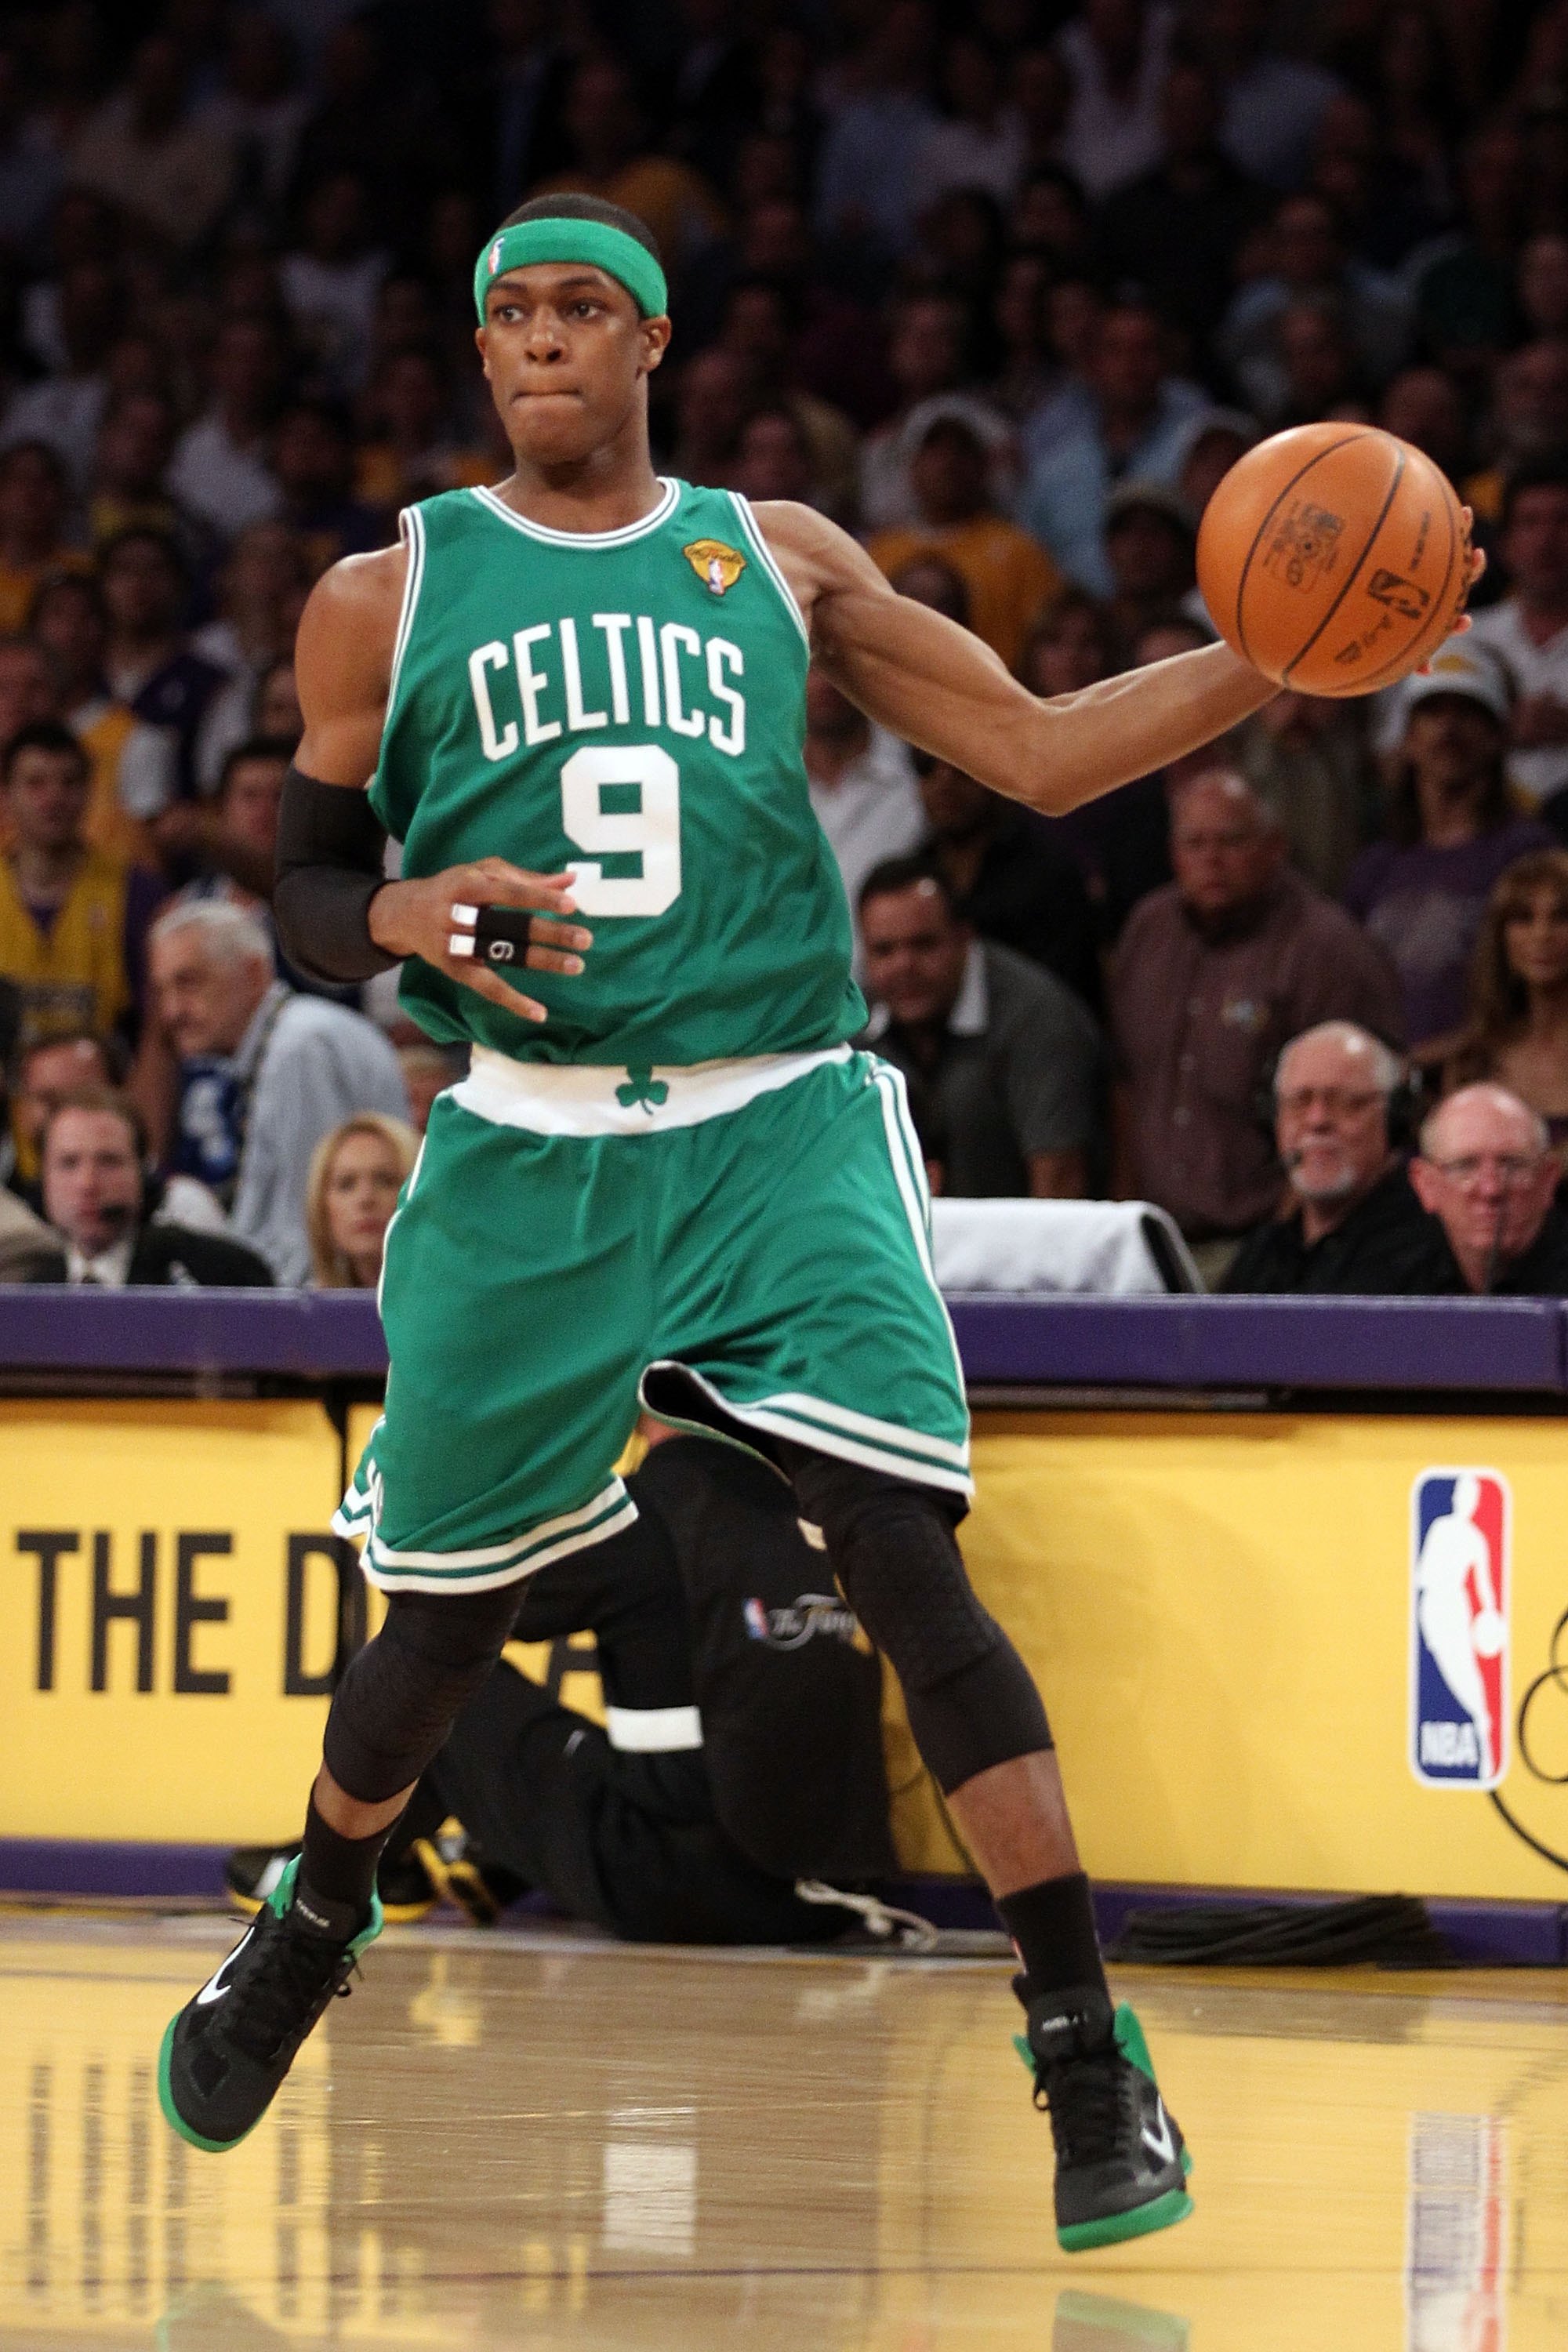 LOS ANGELES, CA - JUNE 15:  Rajon Rondo #9 of the Boston Celtics moves the ball while taking on the Los Angeles Lakers in Game Six of the 2010 NBA Finals at Staples Center on June 15, 2010 in Los Angeles, California.  NOTE TO USER: User expressly acknowle